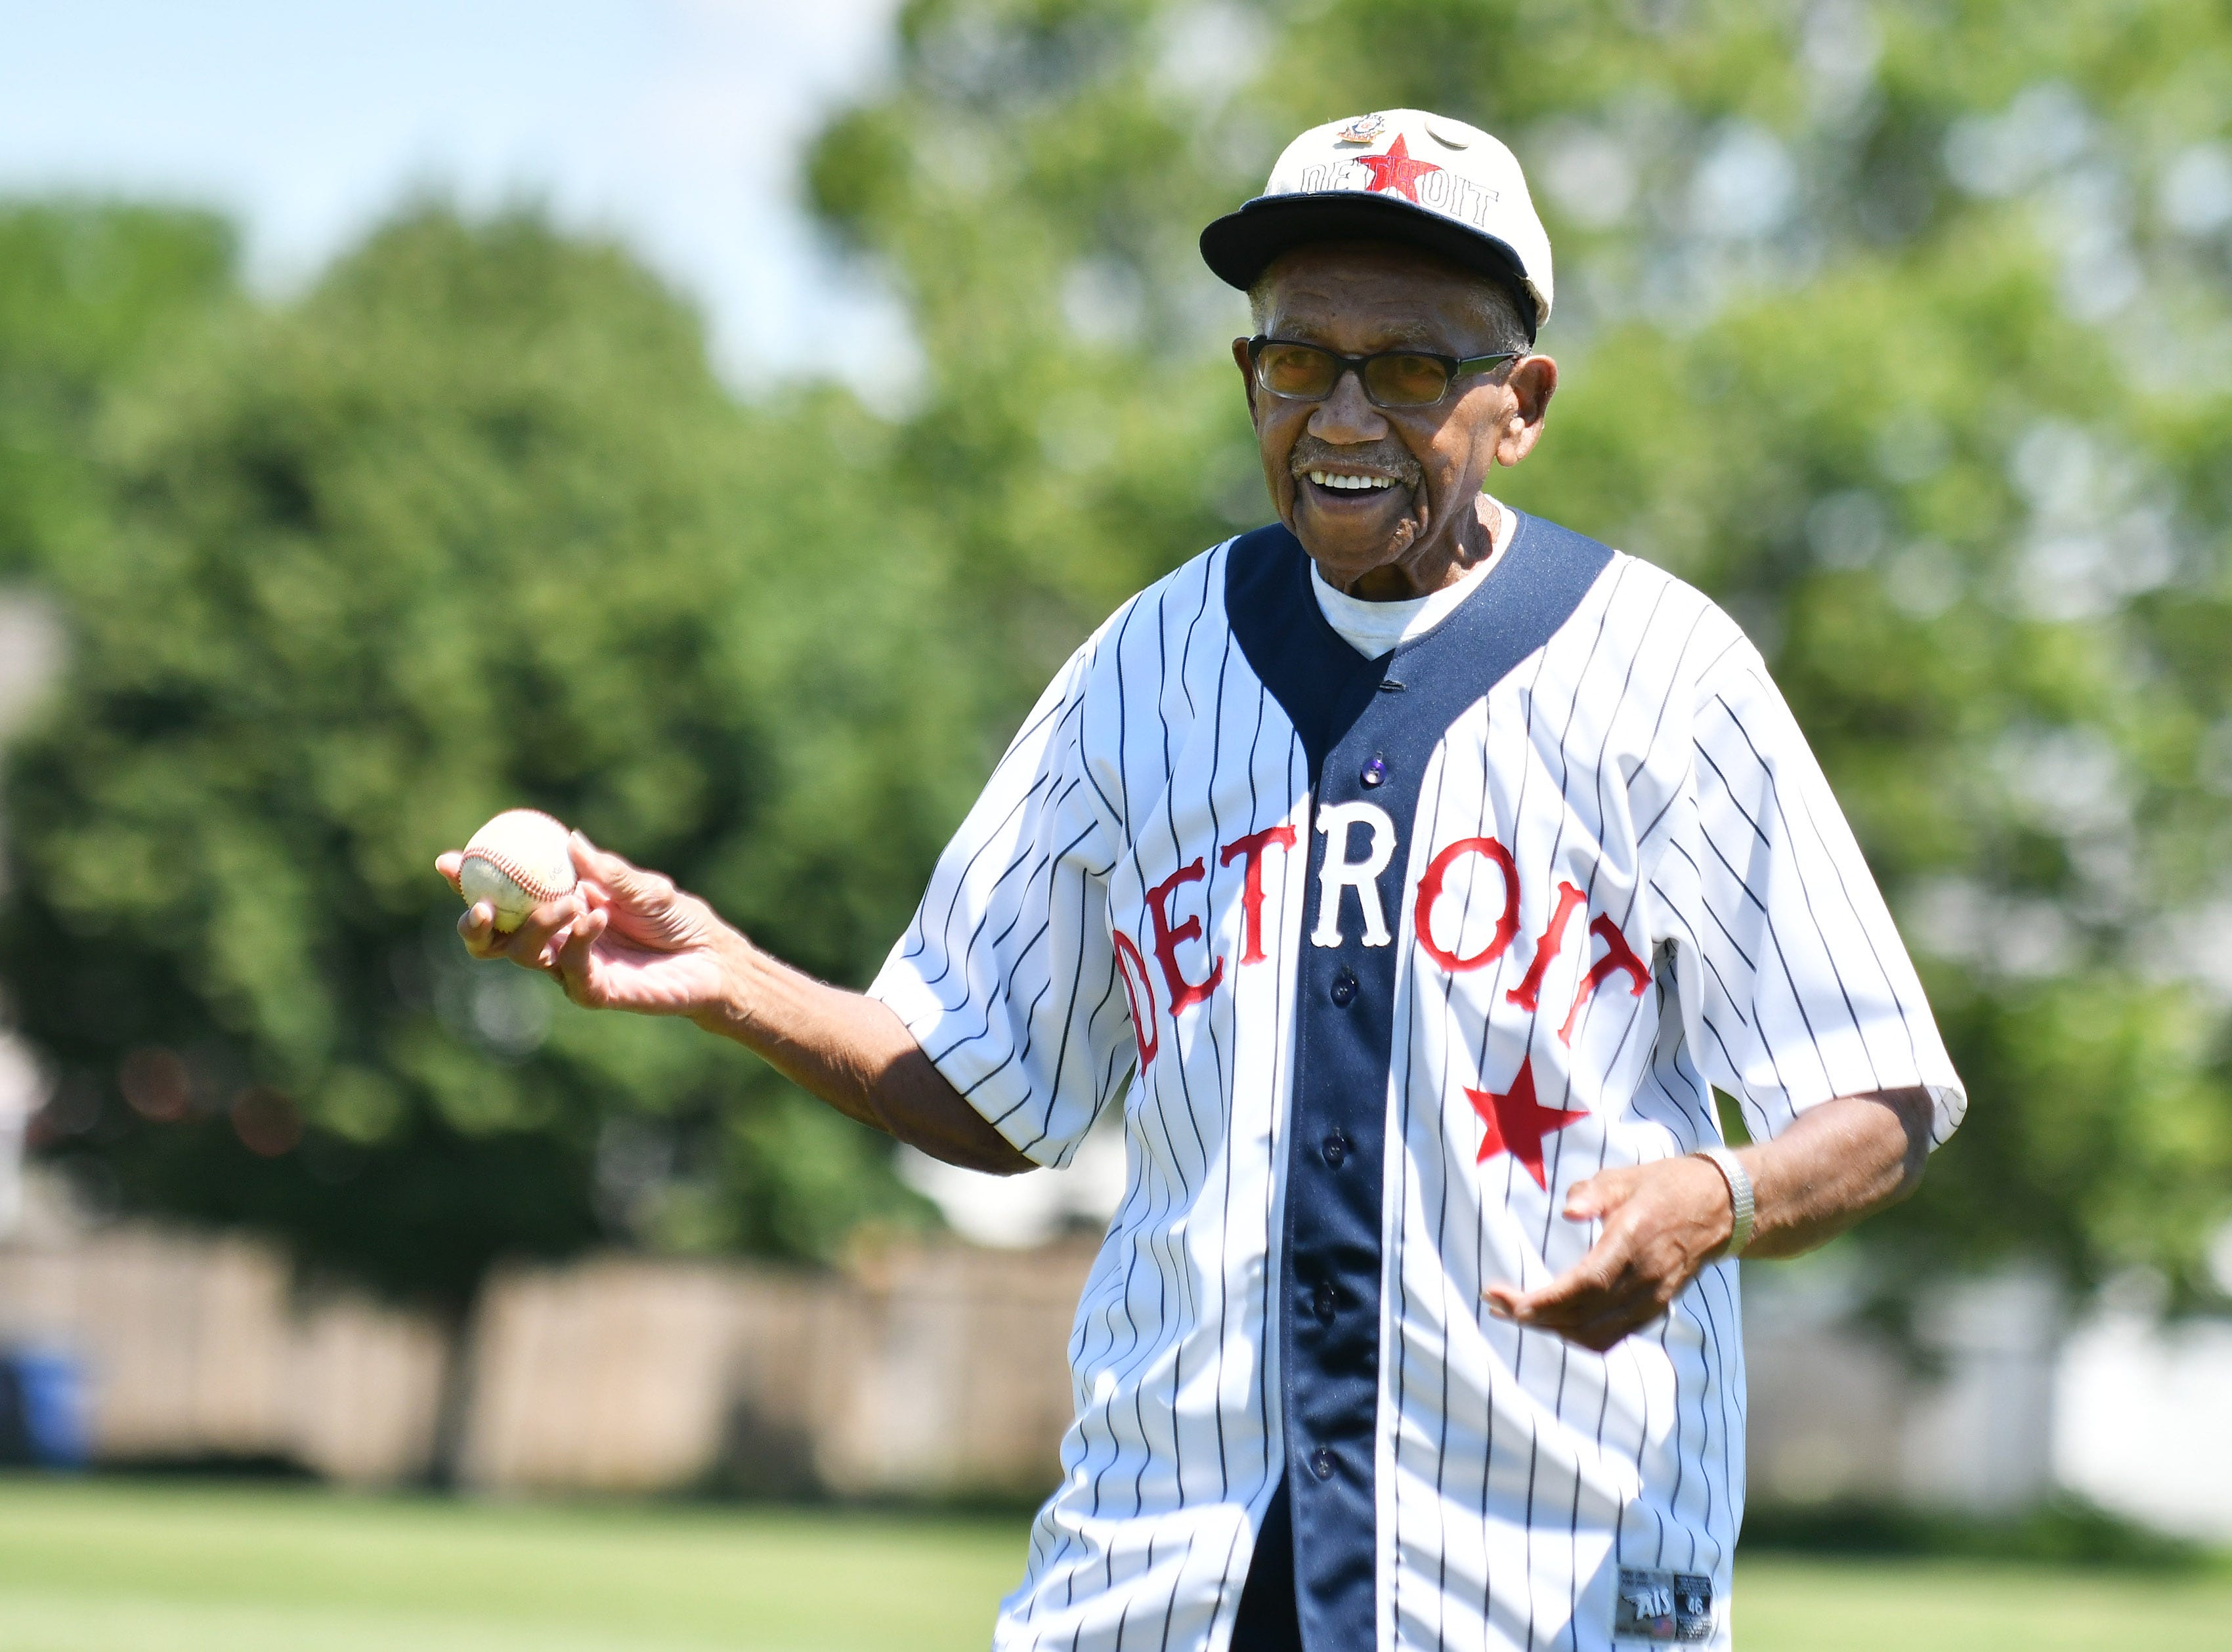 Ron Teasley, 92, of Detroit, who played in the Negro League, about to throw out the ceremonial first pitch.